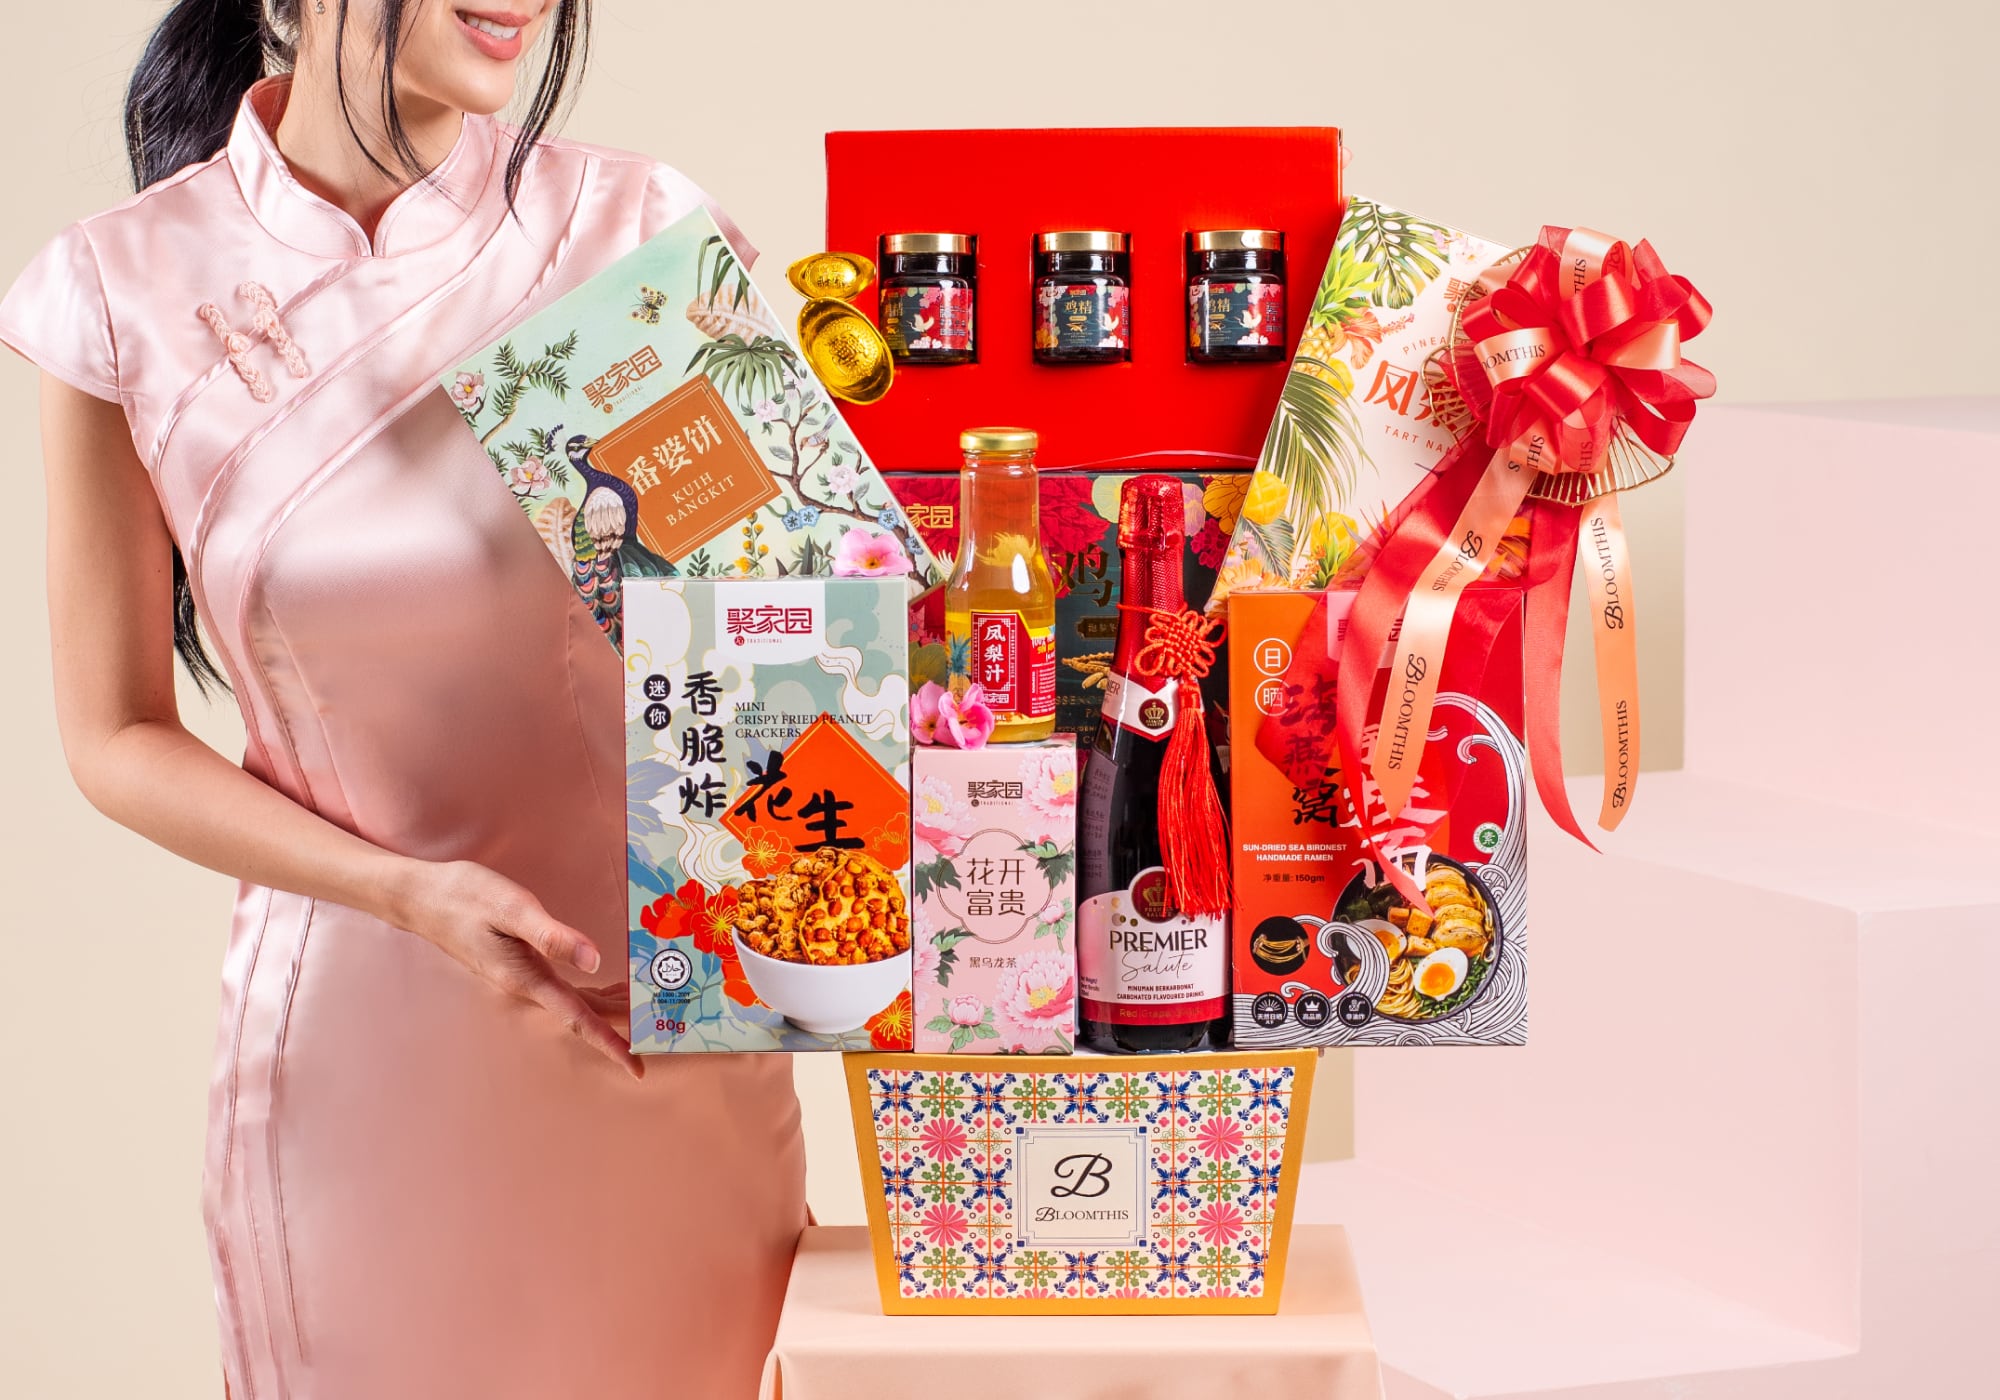 bloomthis-chinese-new-year-hampers-usp-04-free-same-day-hamper-delivery